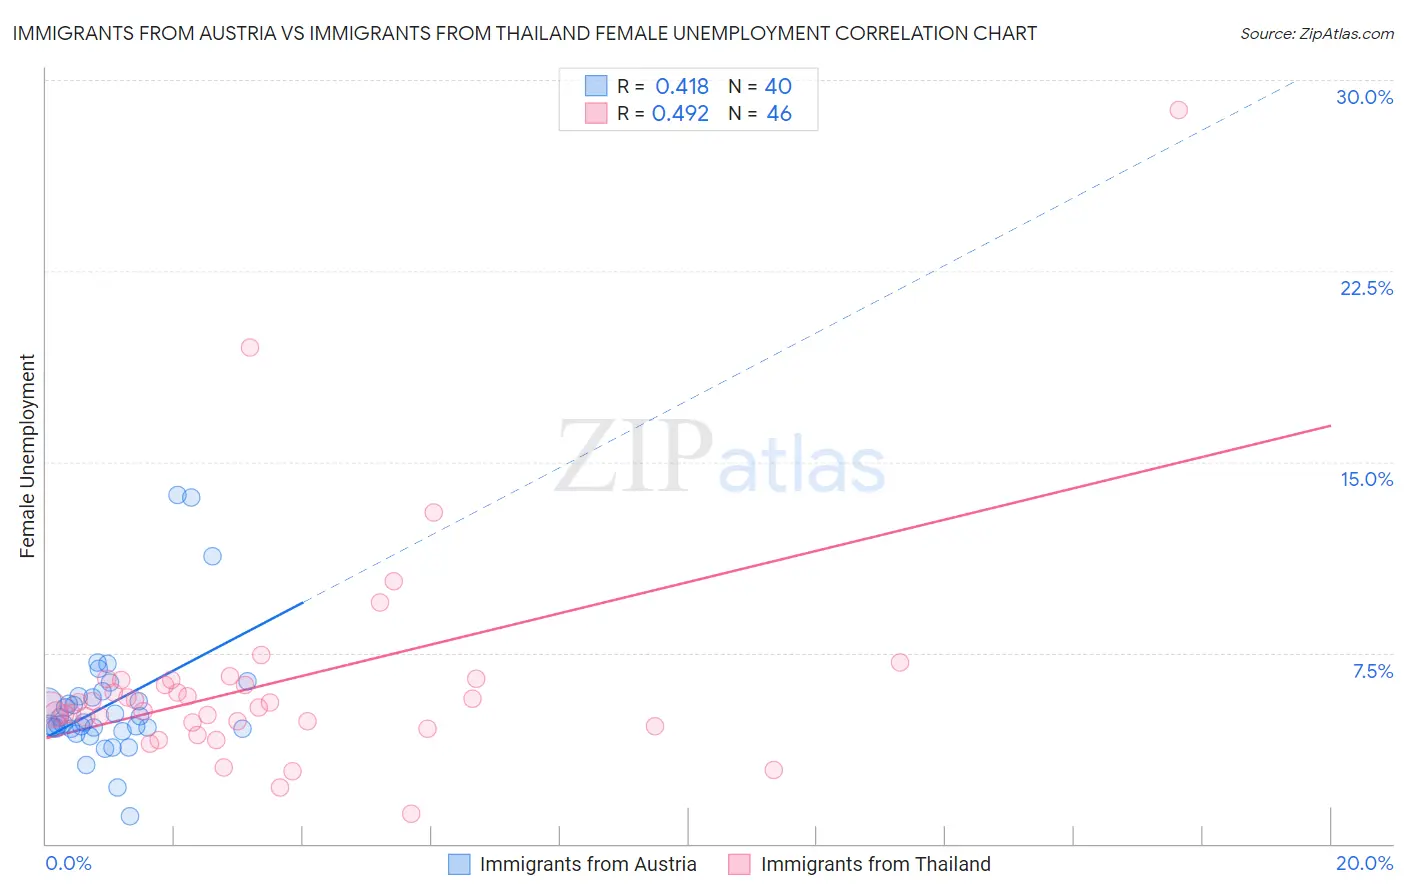 Immigrants from Austria vs Immigrants from Thailand Female Unemployment